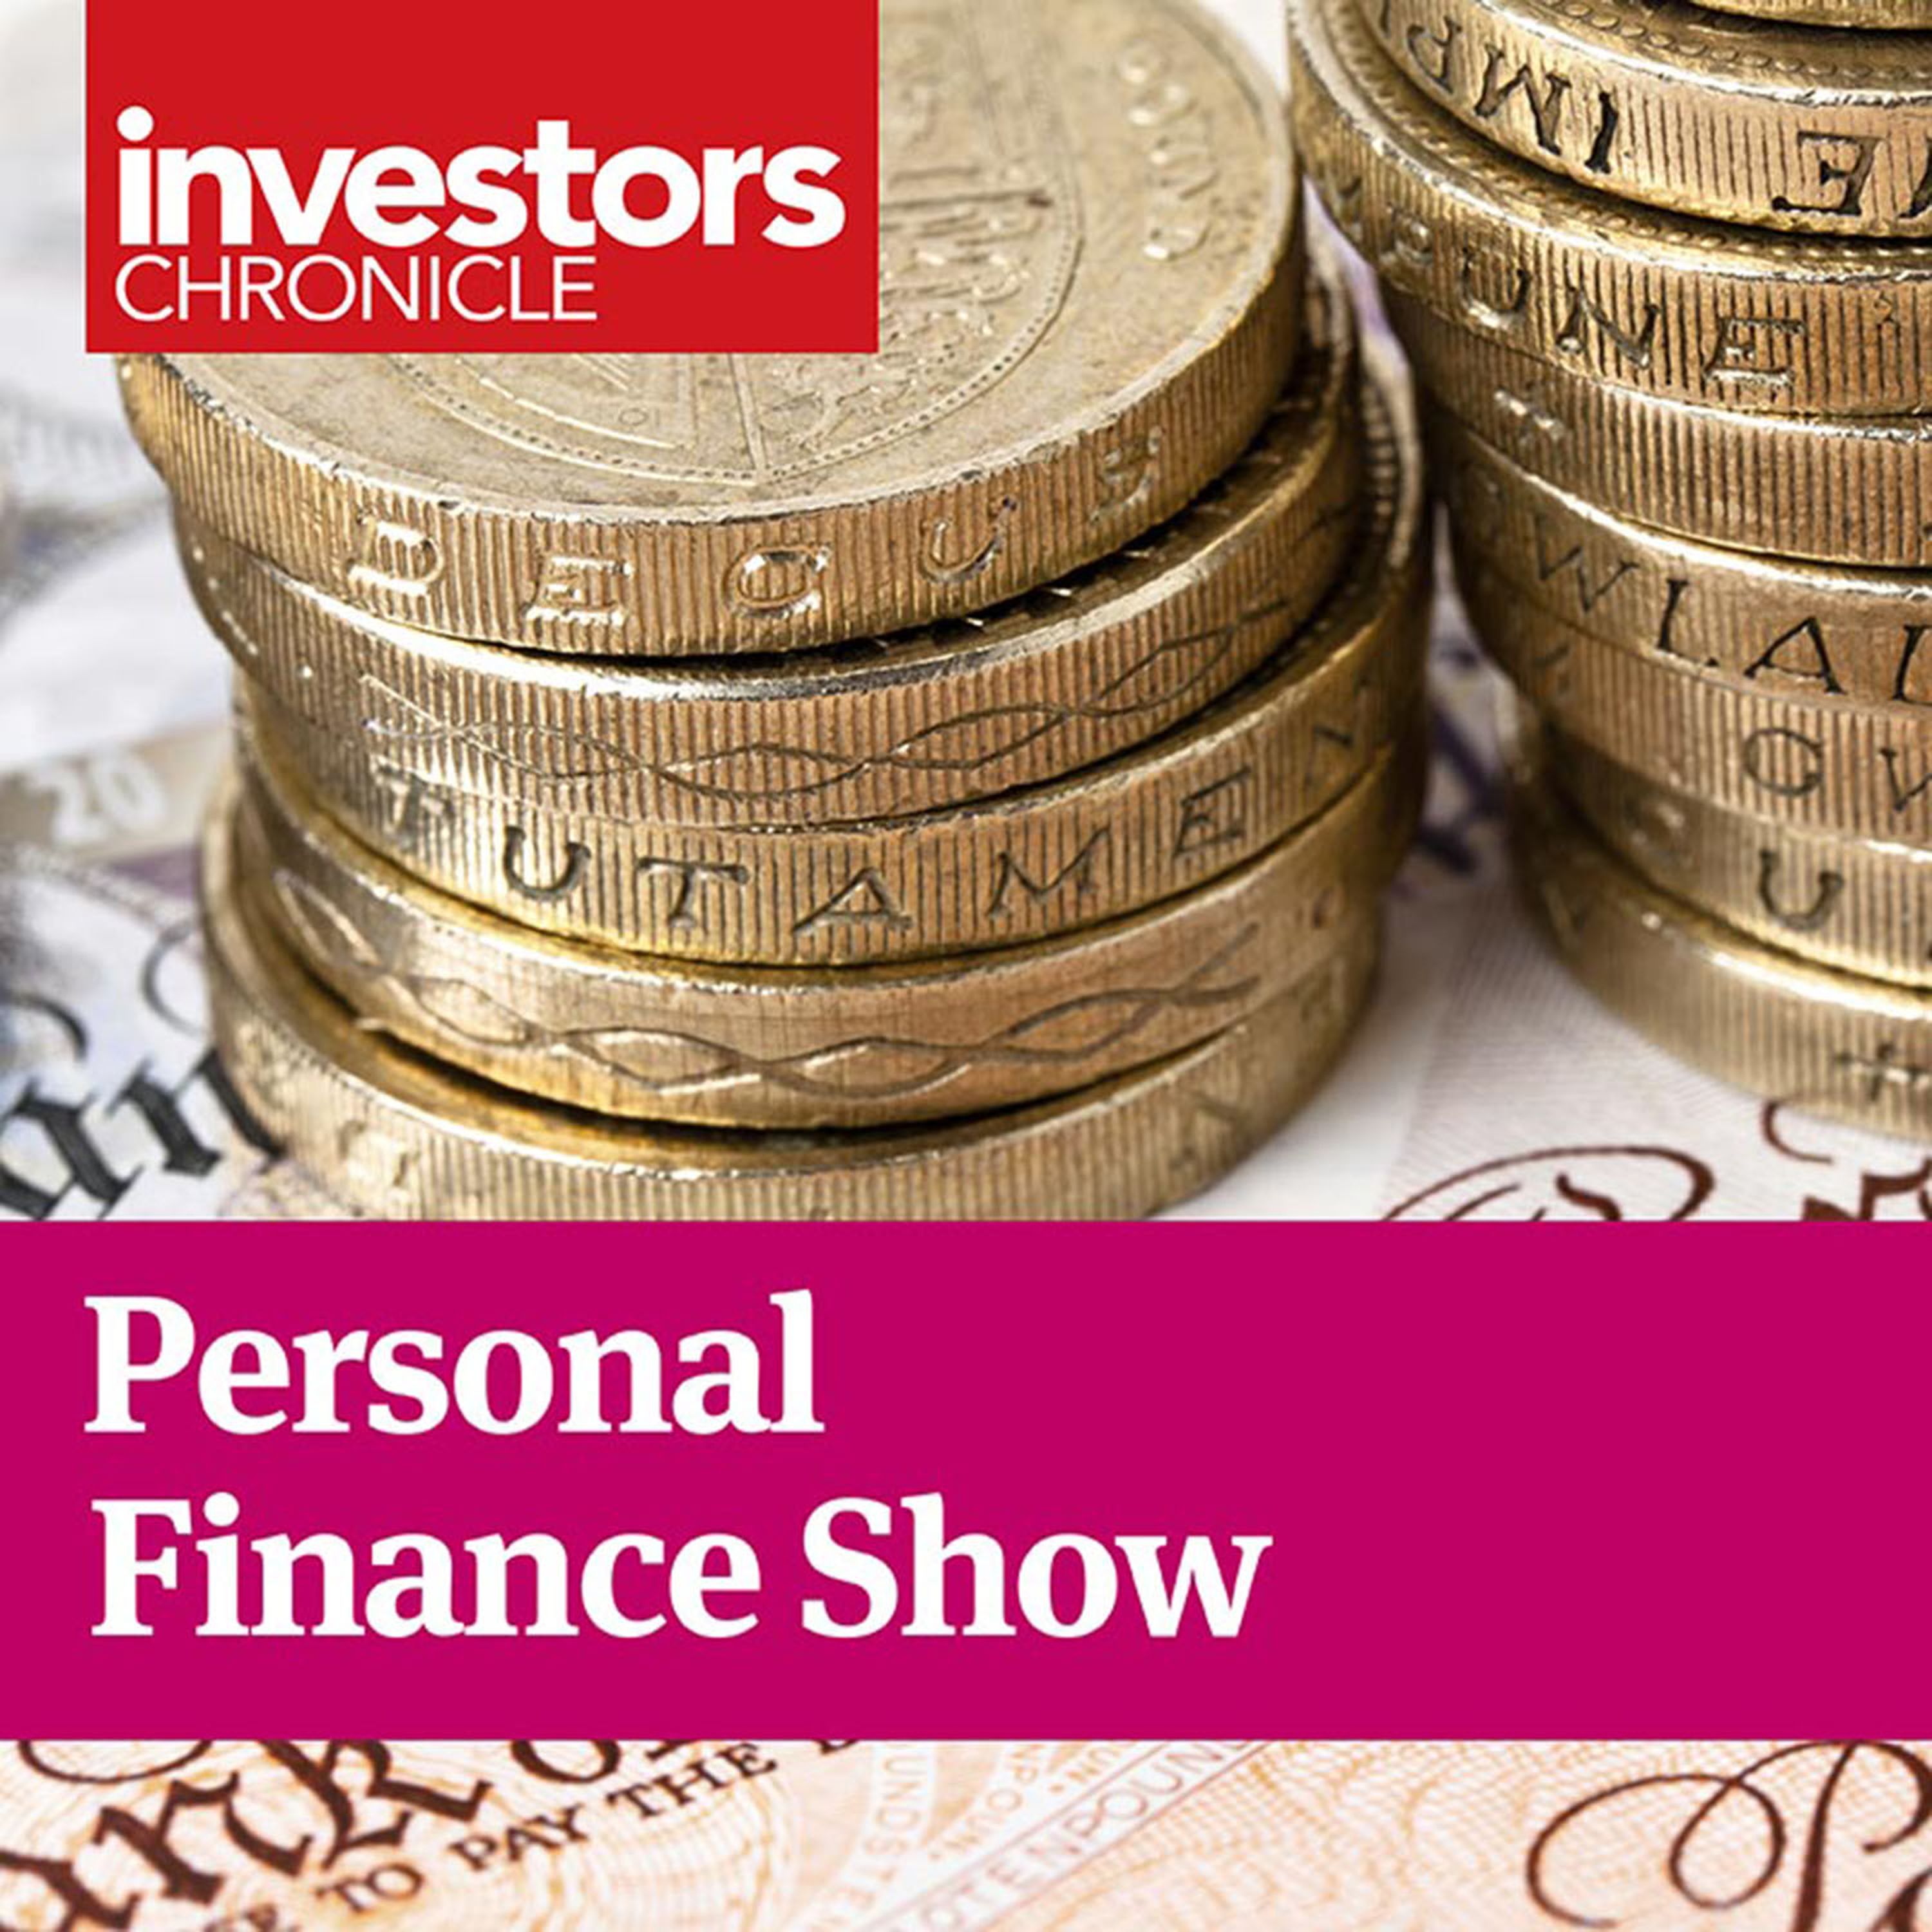 Personal Finance Show: The right approach to retirement and success with styles and factors